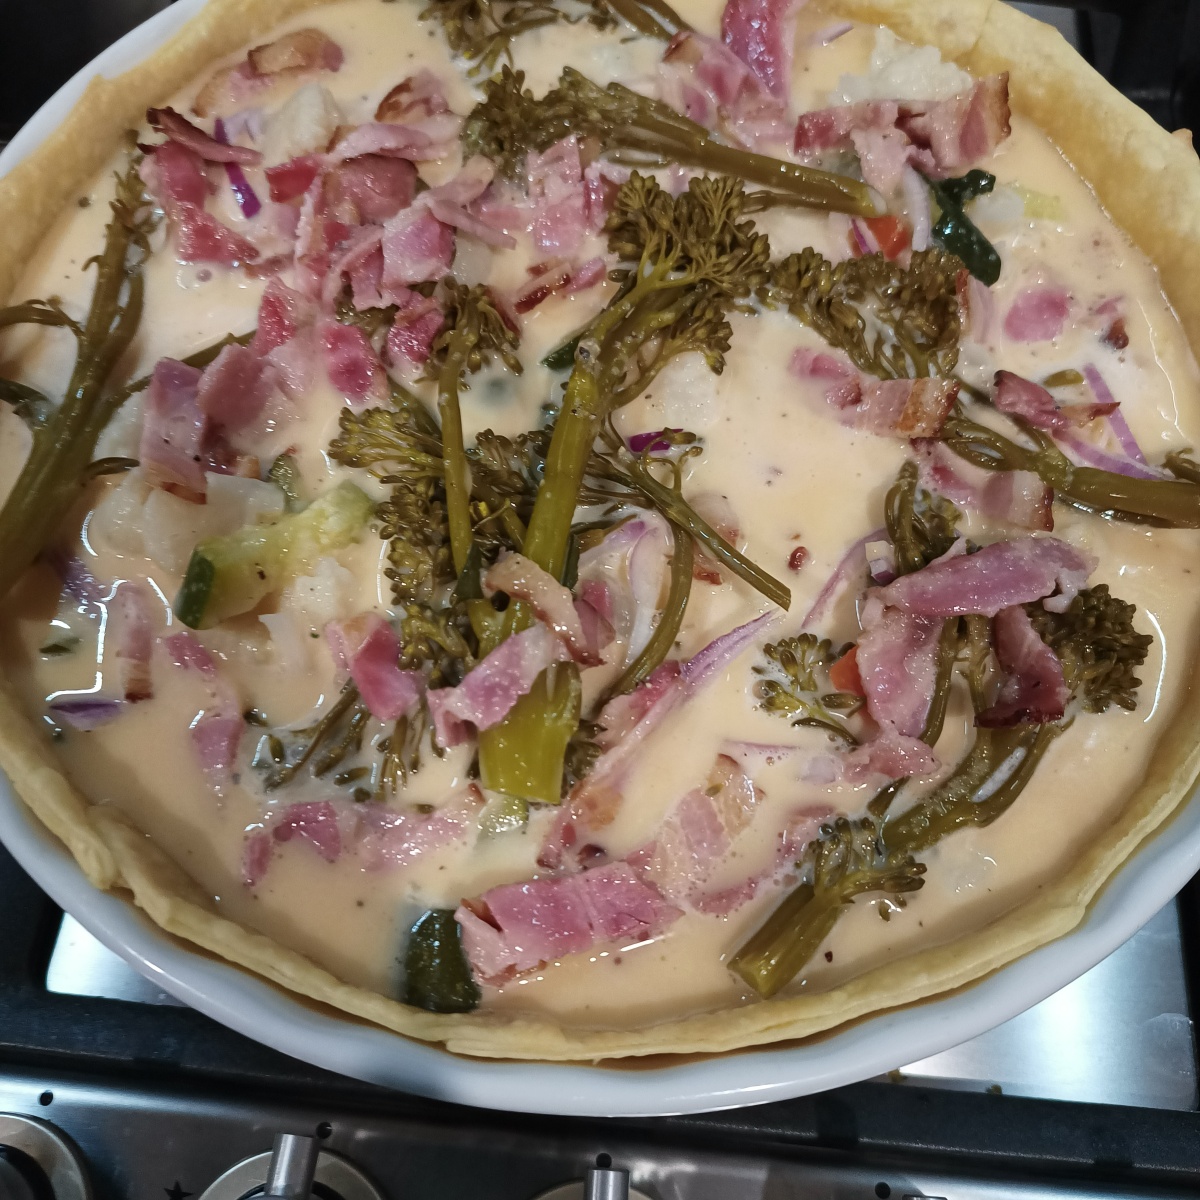 Tasty tip Tuesday! Make a quiche with left over vegetables